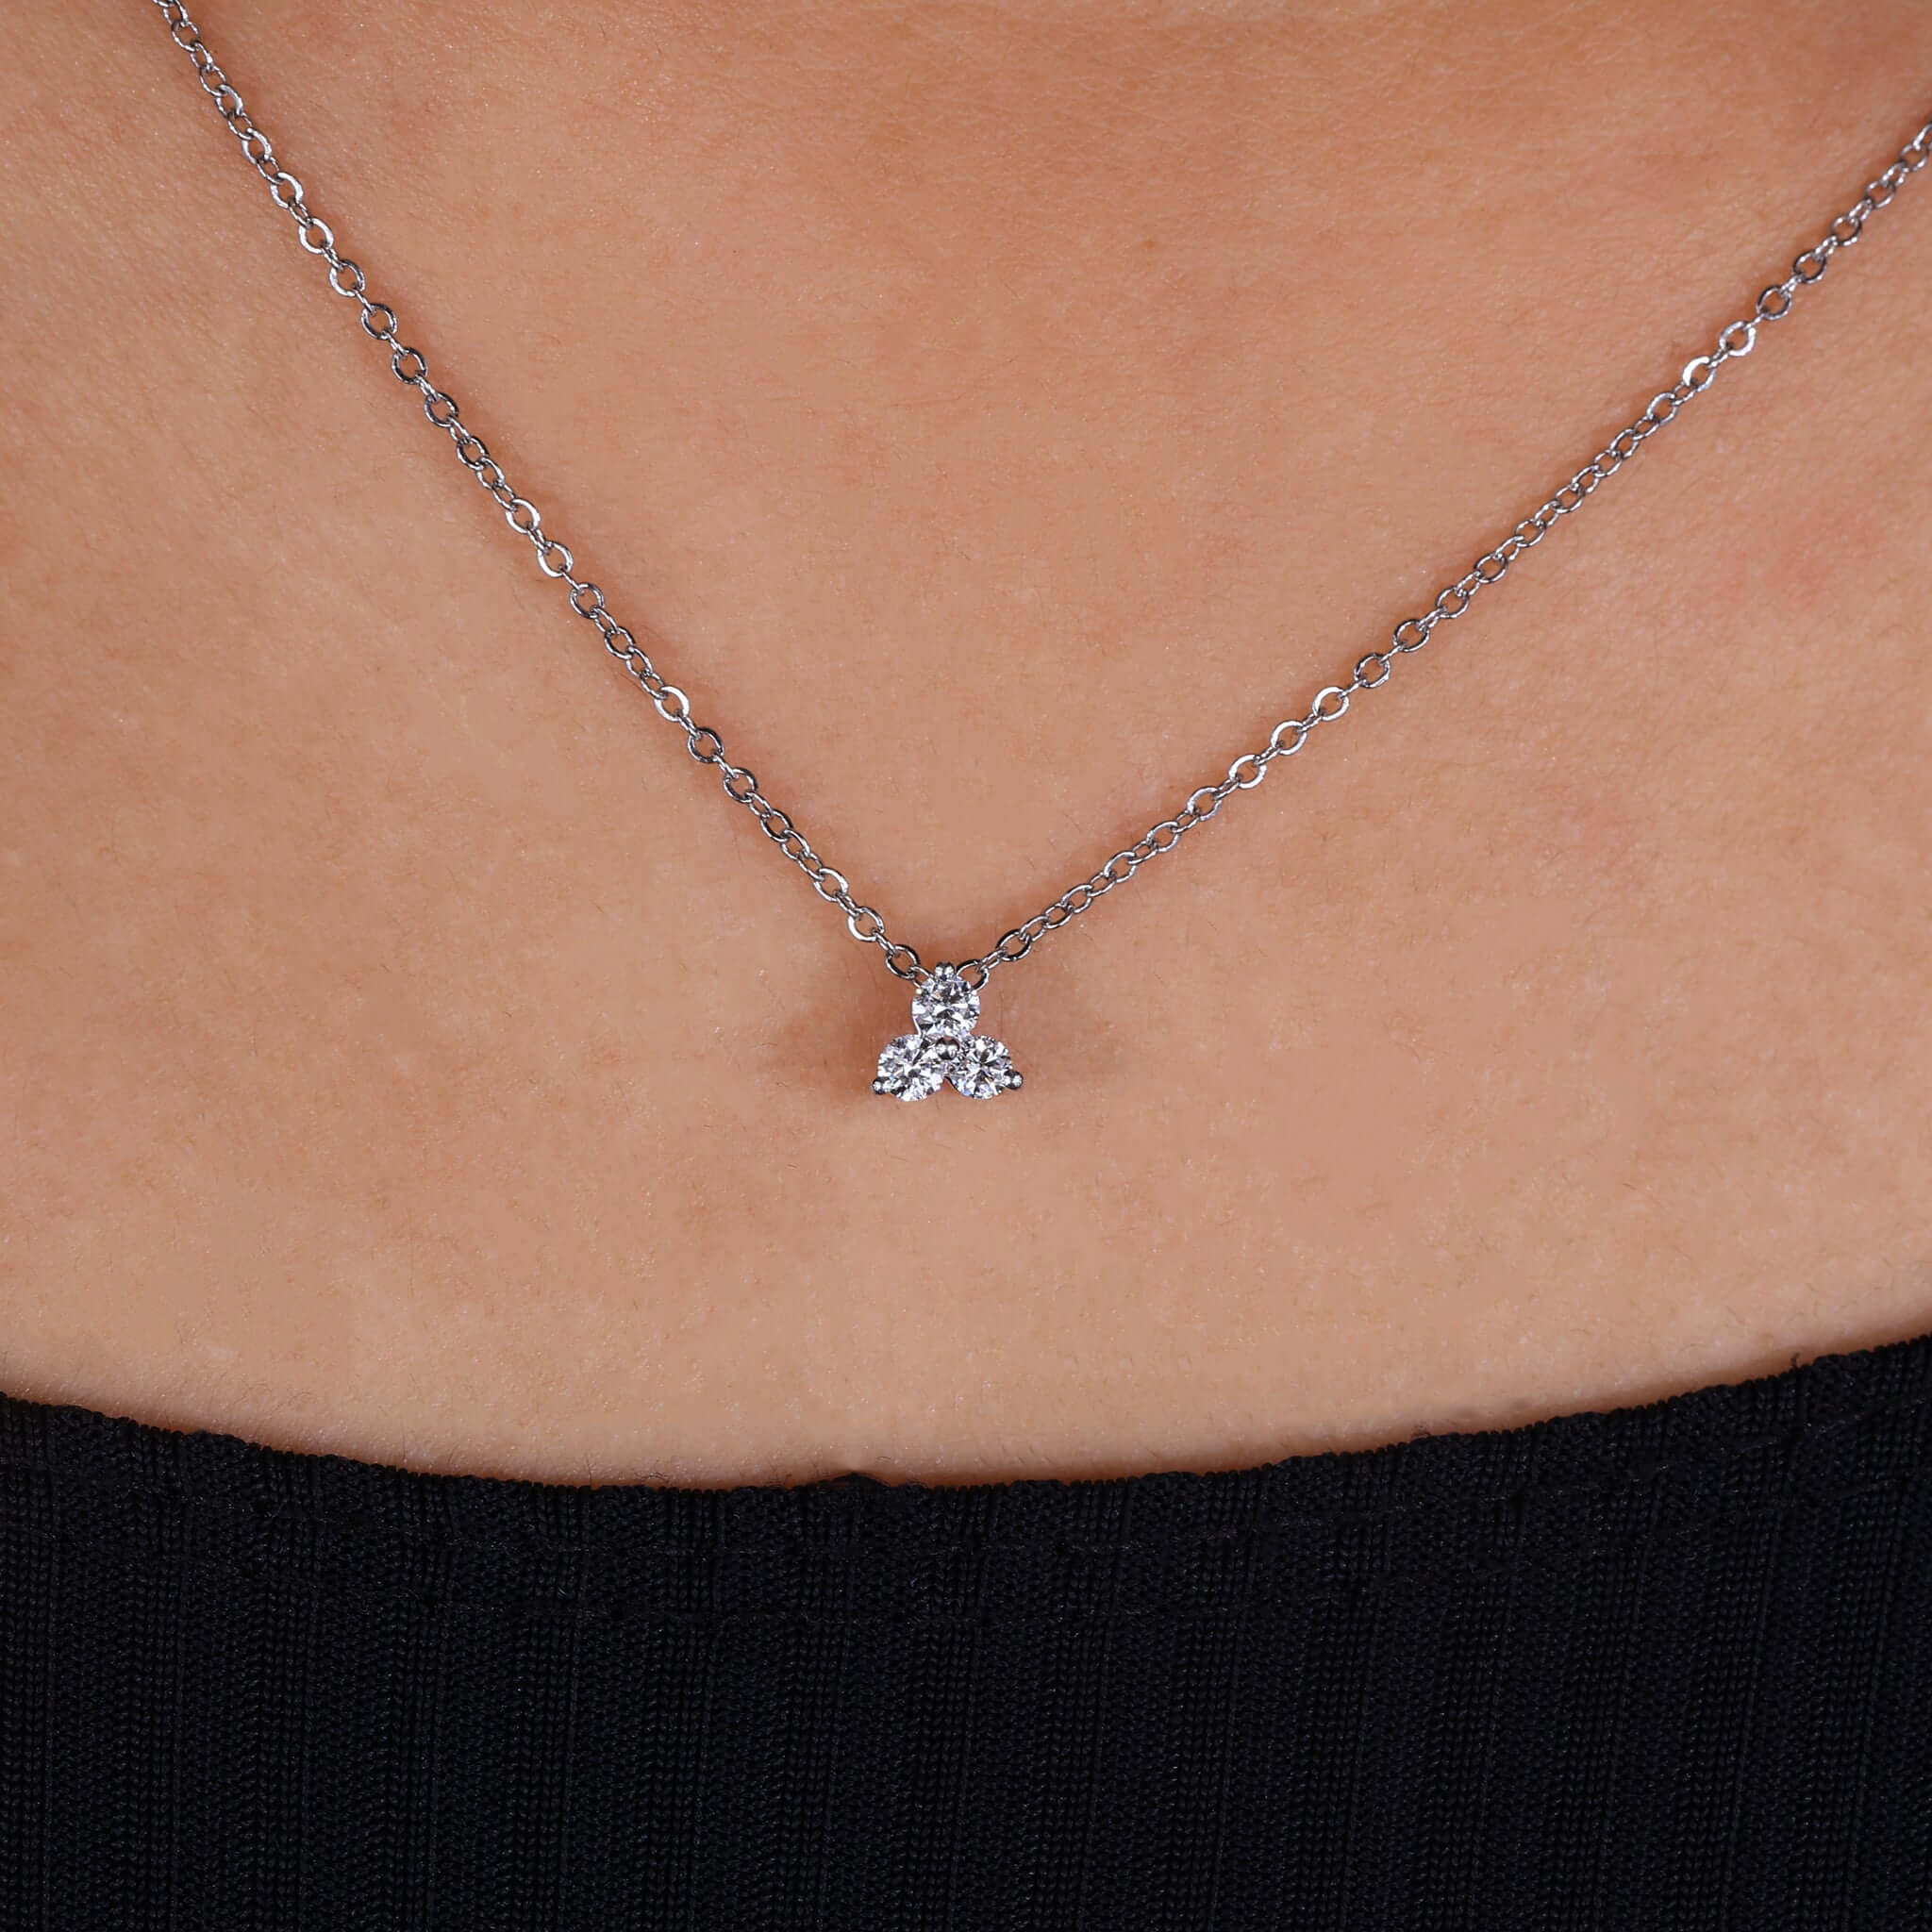 Elegant round diamond pendant, shimmering with brilliance against a soft background.